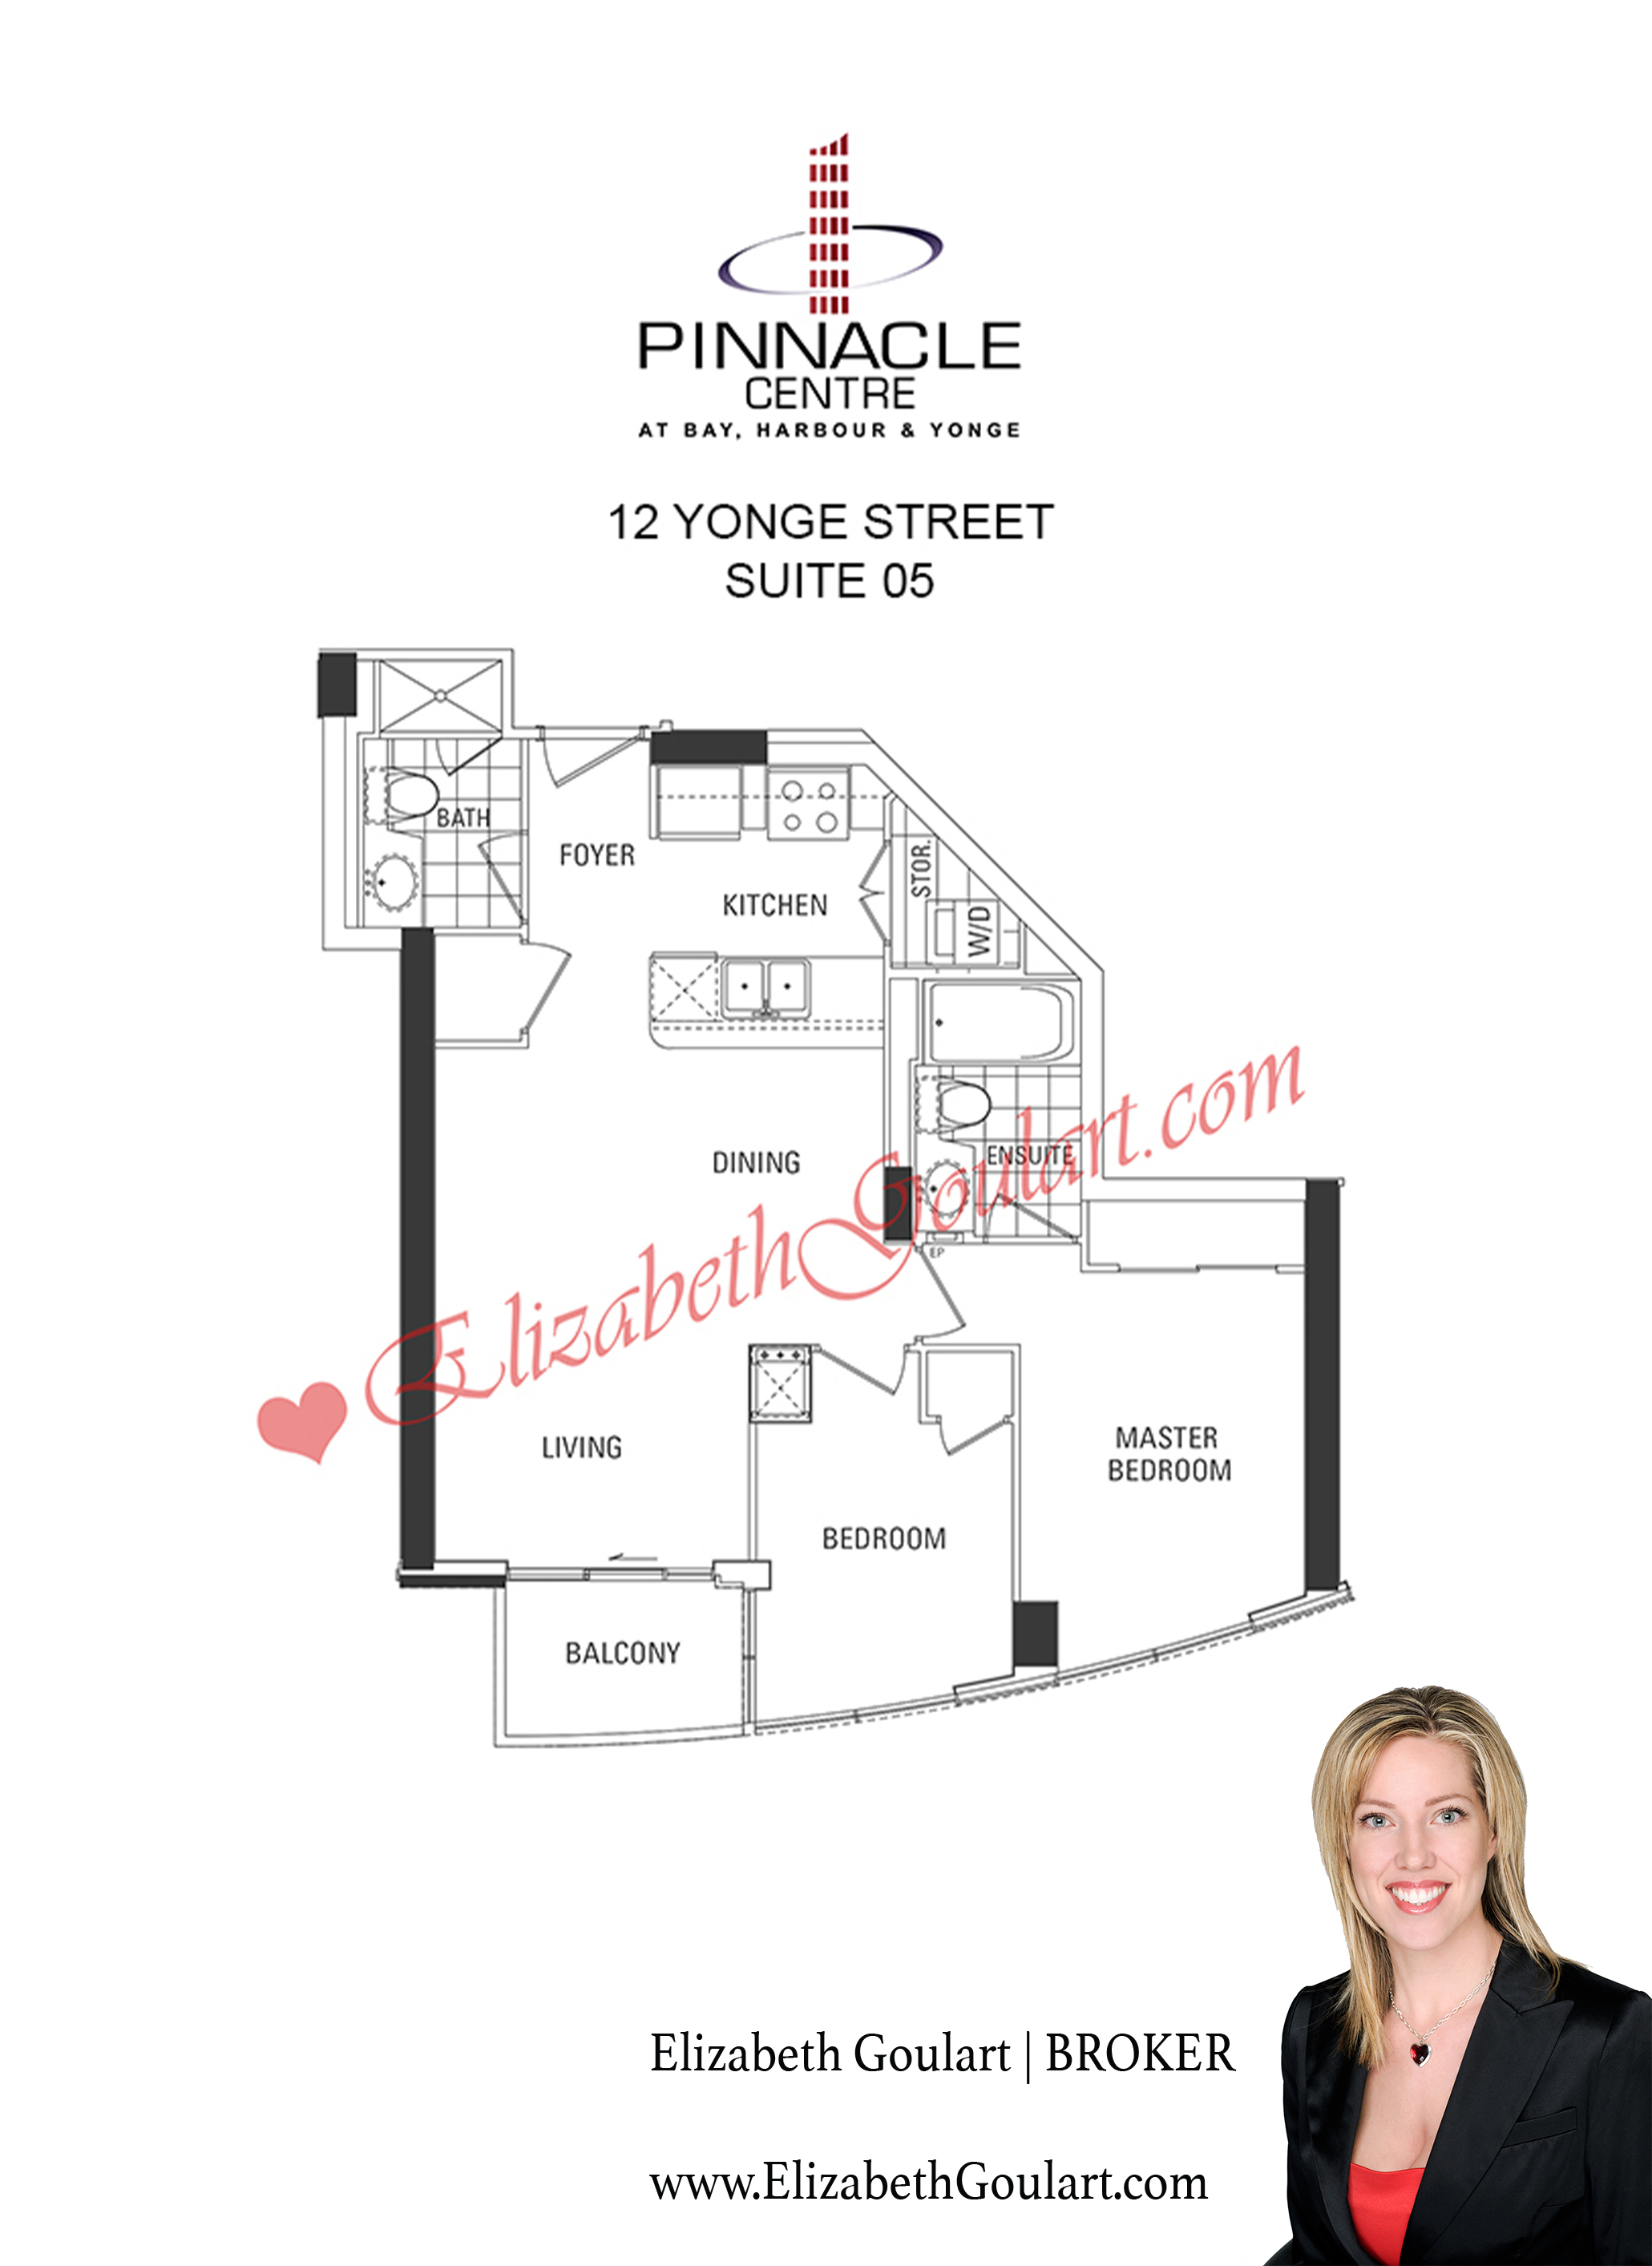 12 Yonge Street Pinnacle Centre Condos For Sale / Rent